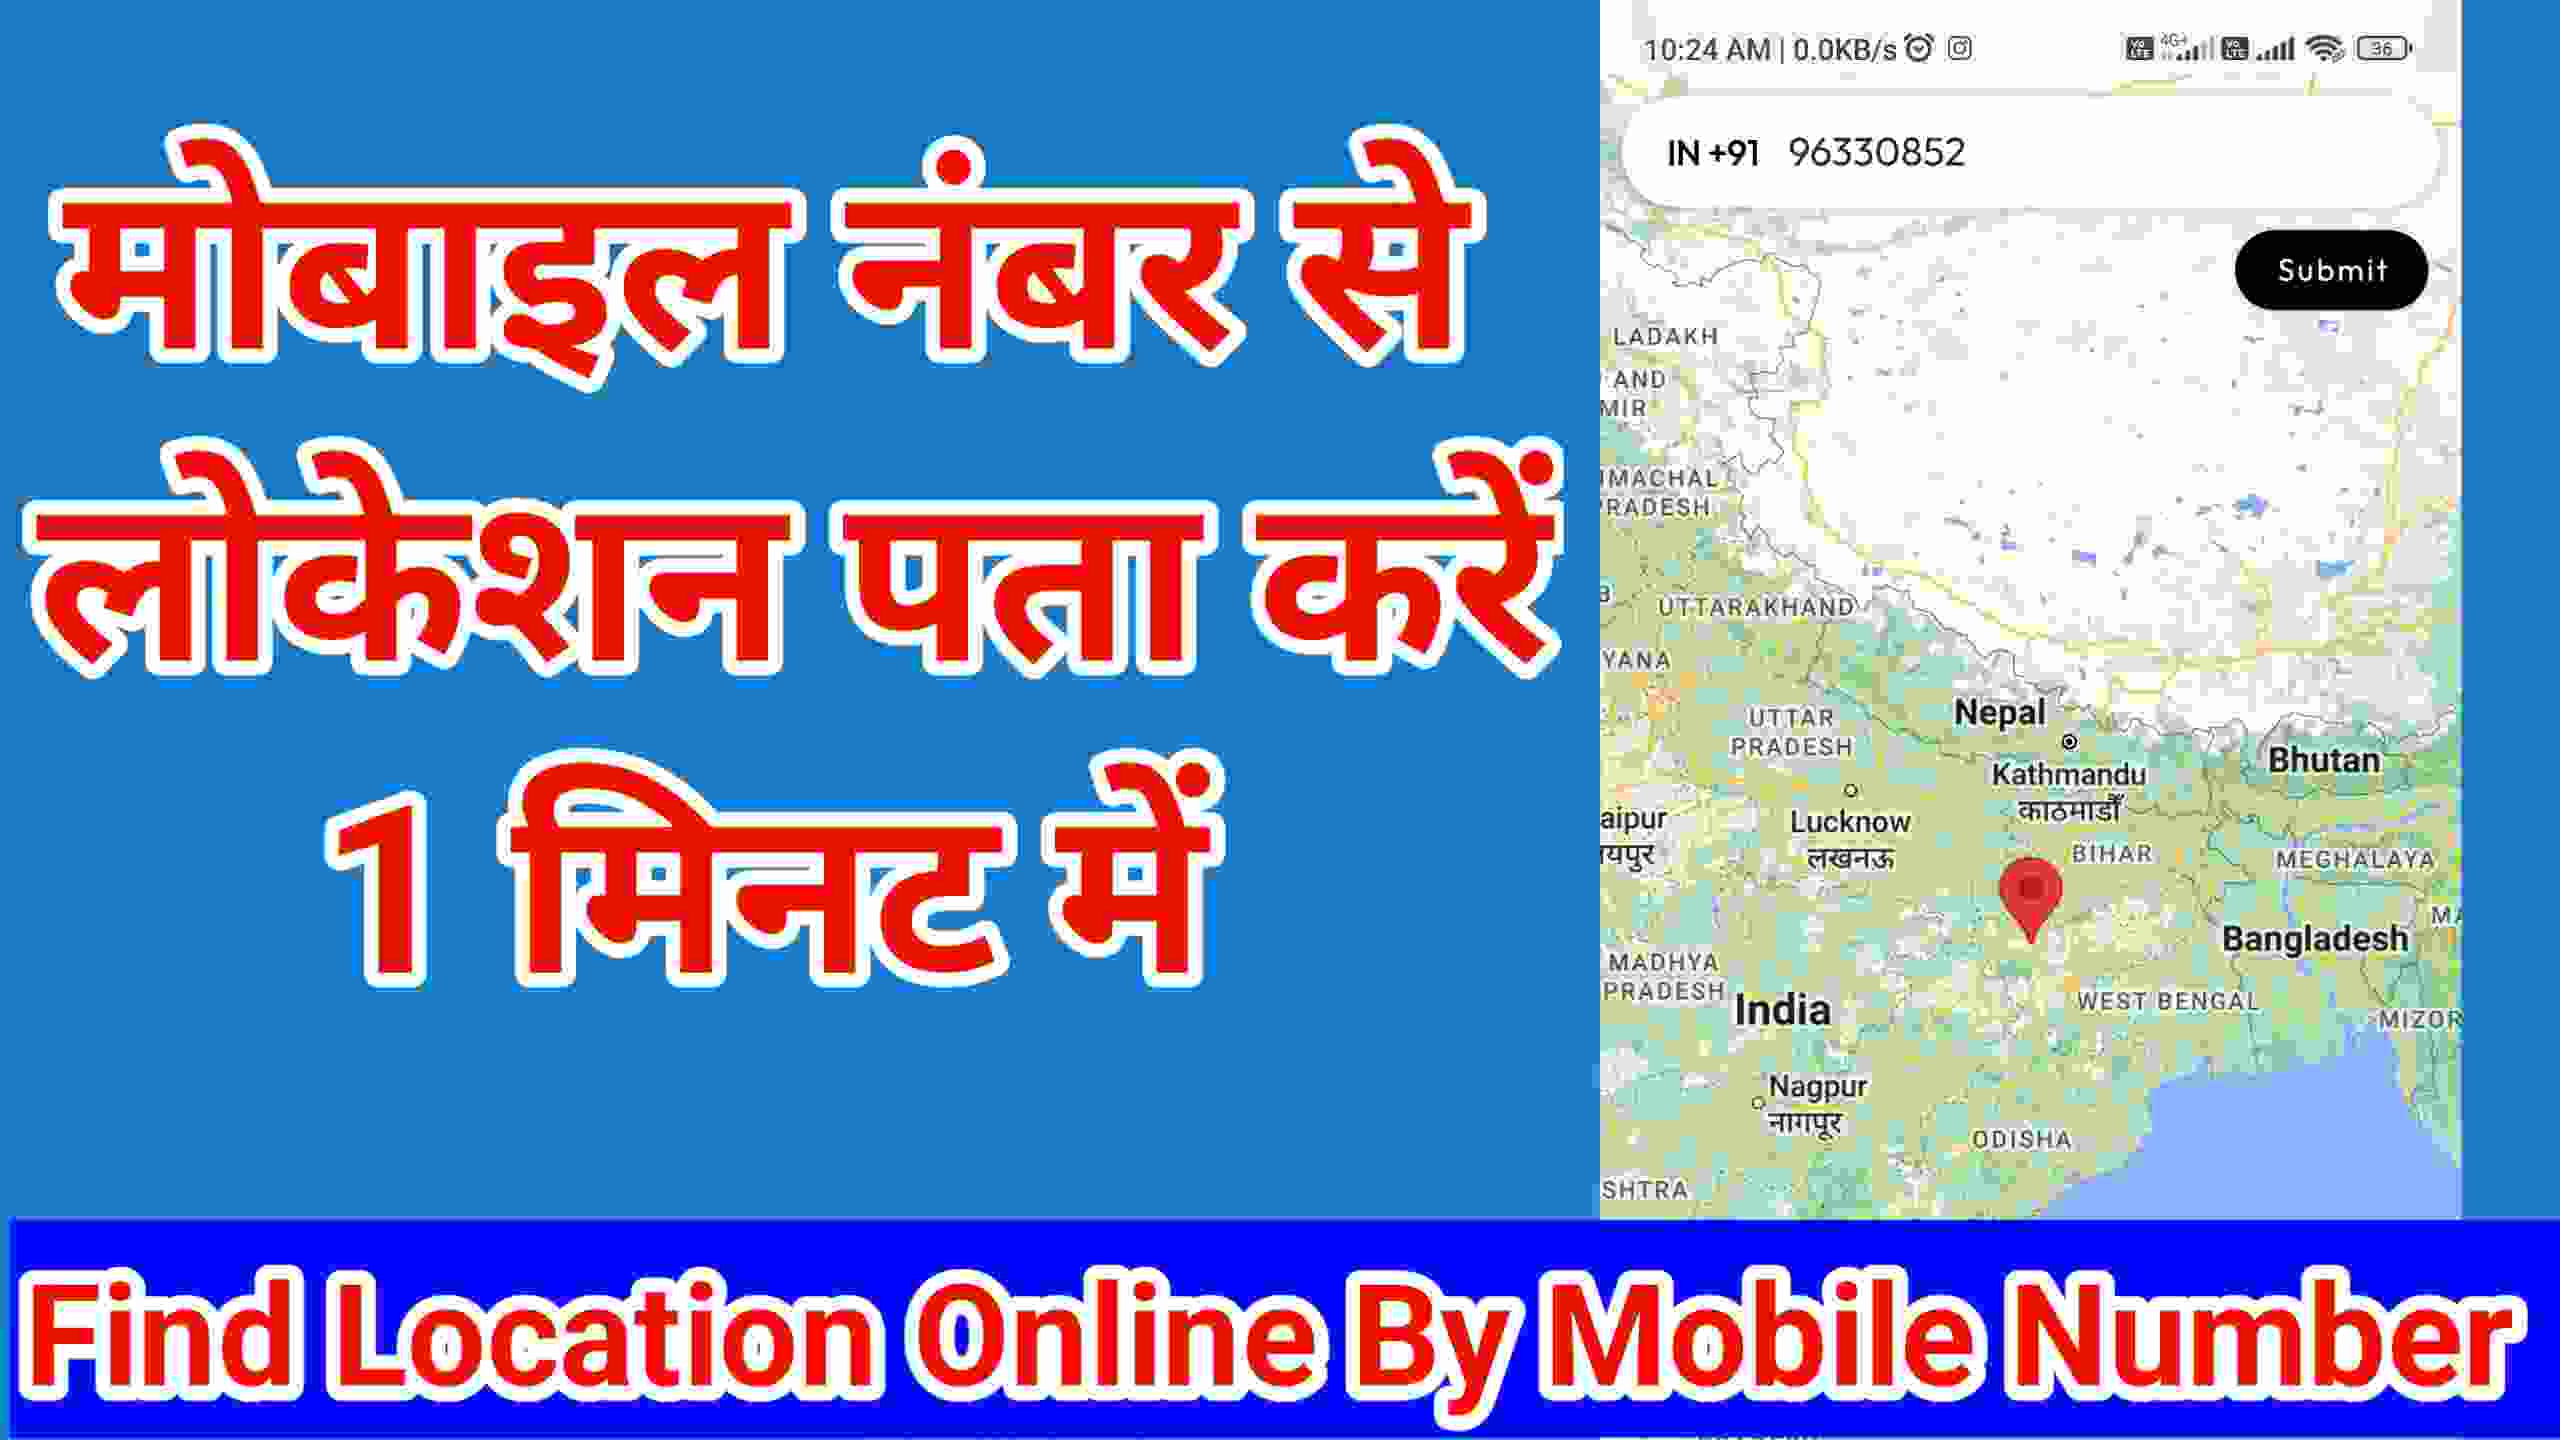 Find Location Online by Mobile Number